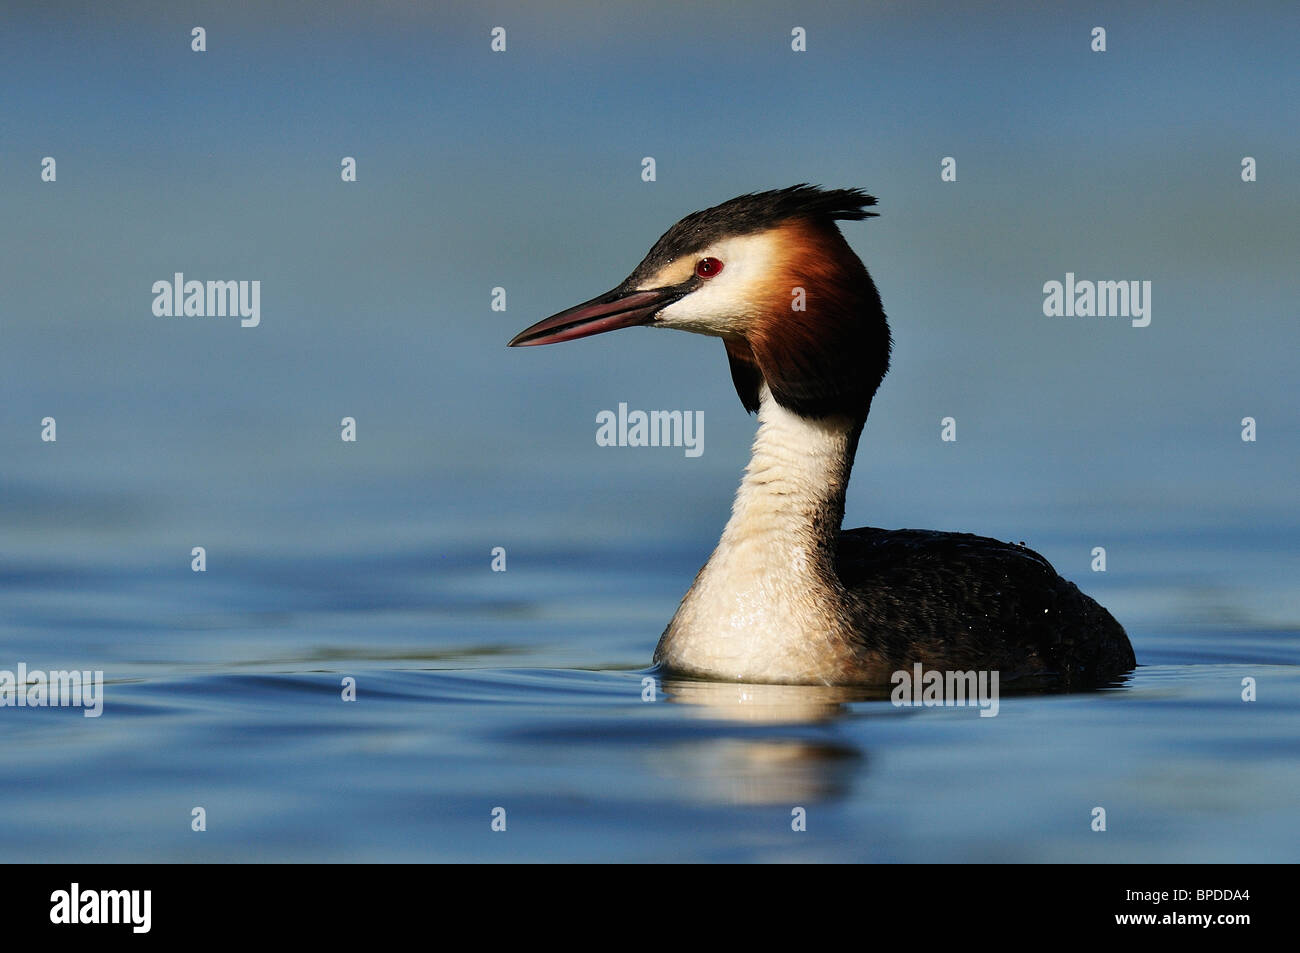 Adult of Great Crested Grebe (Podiceps cristatus) Stock Photo